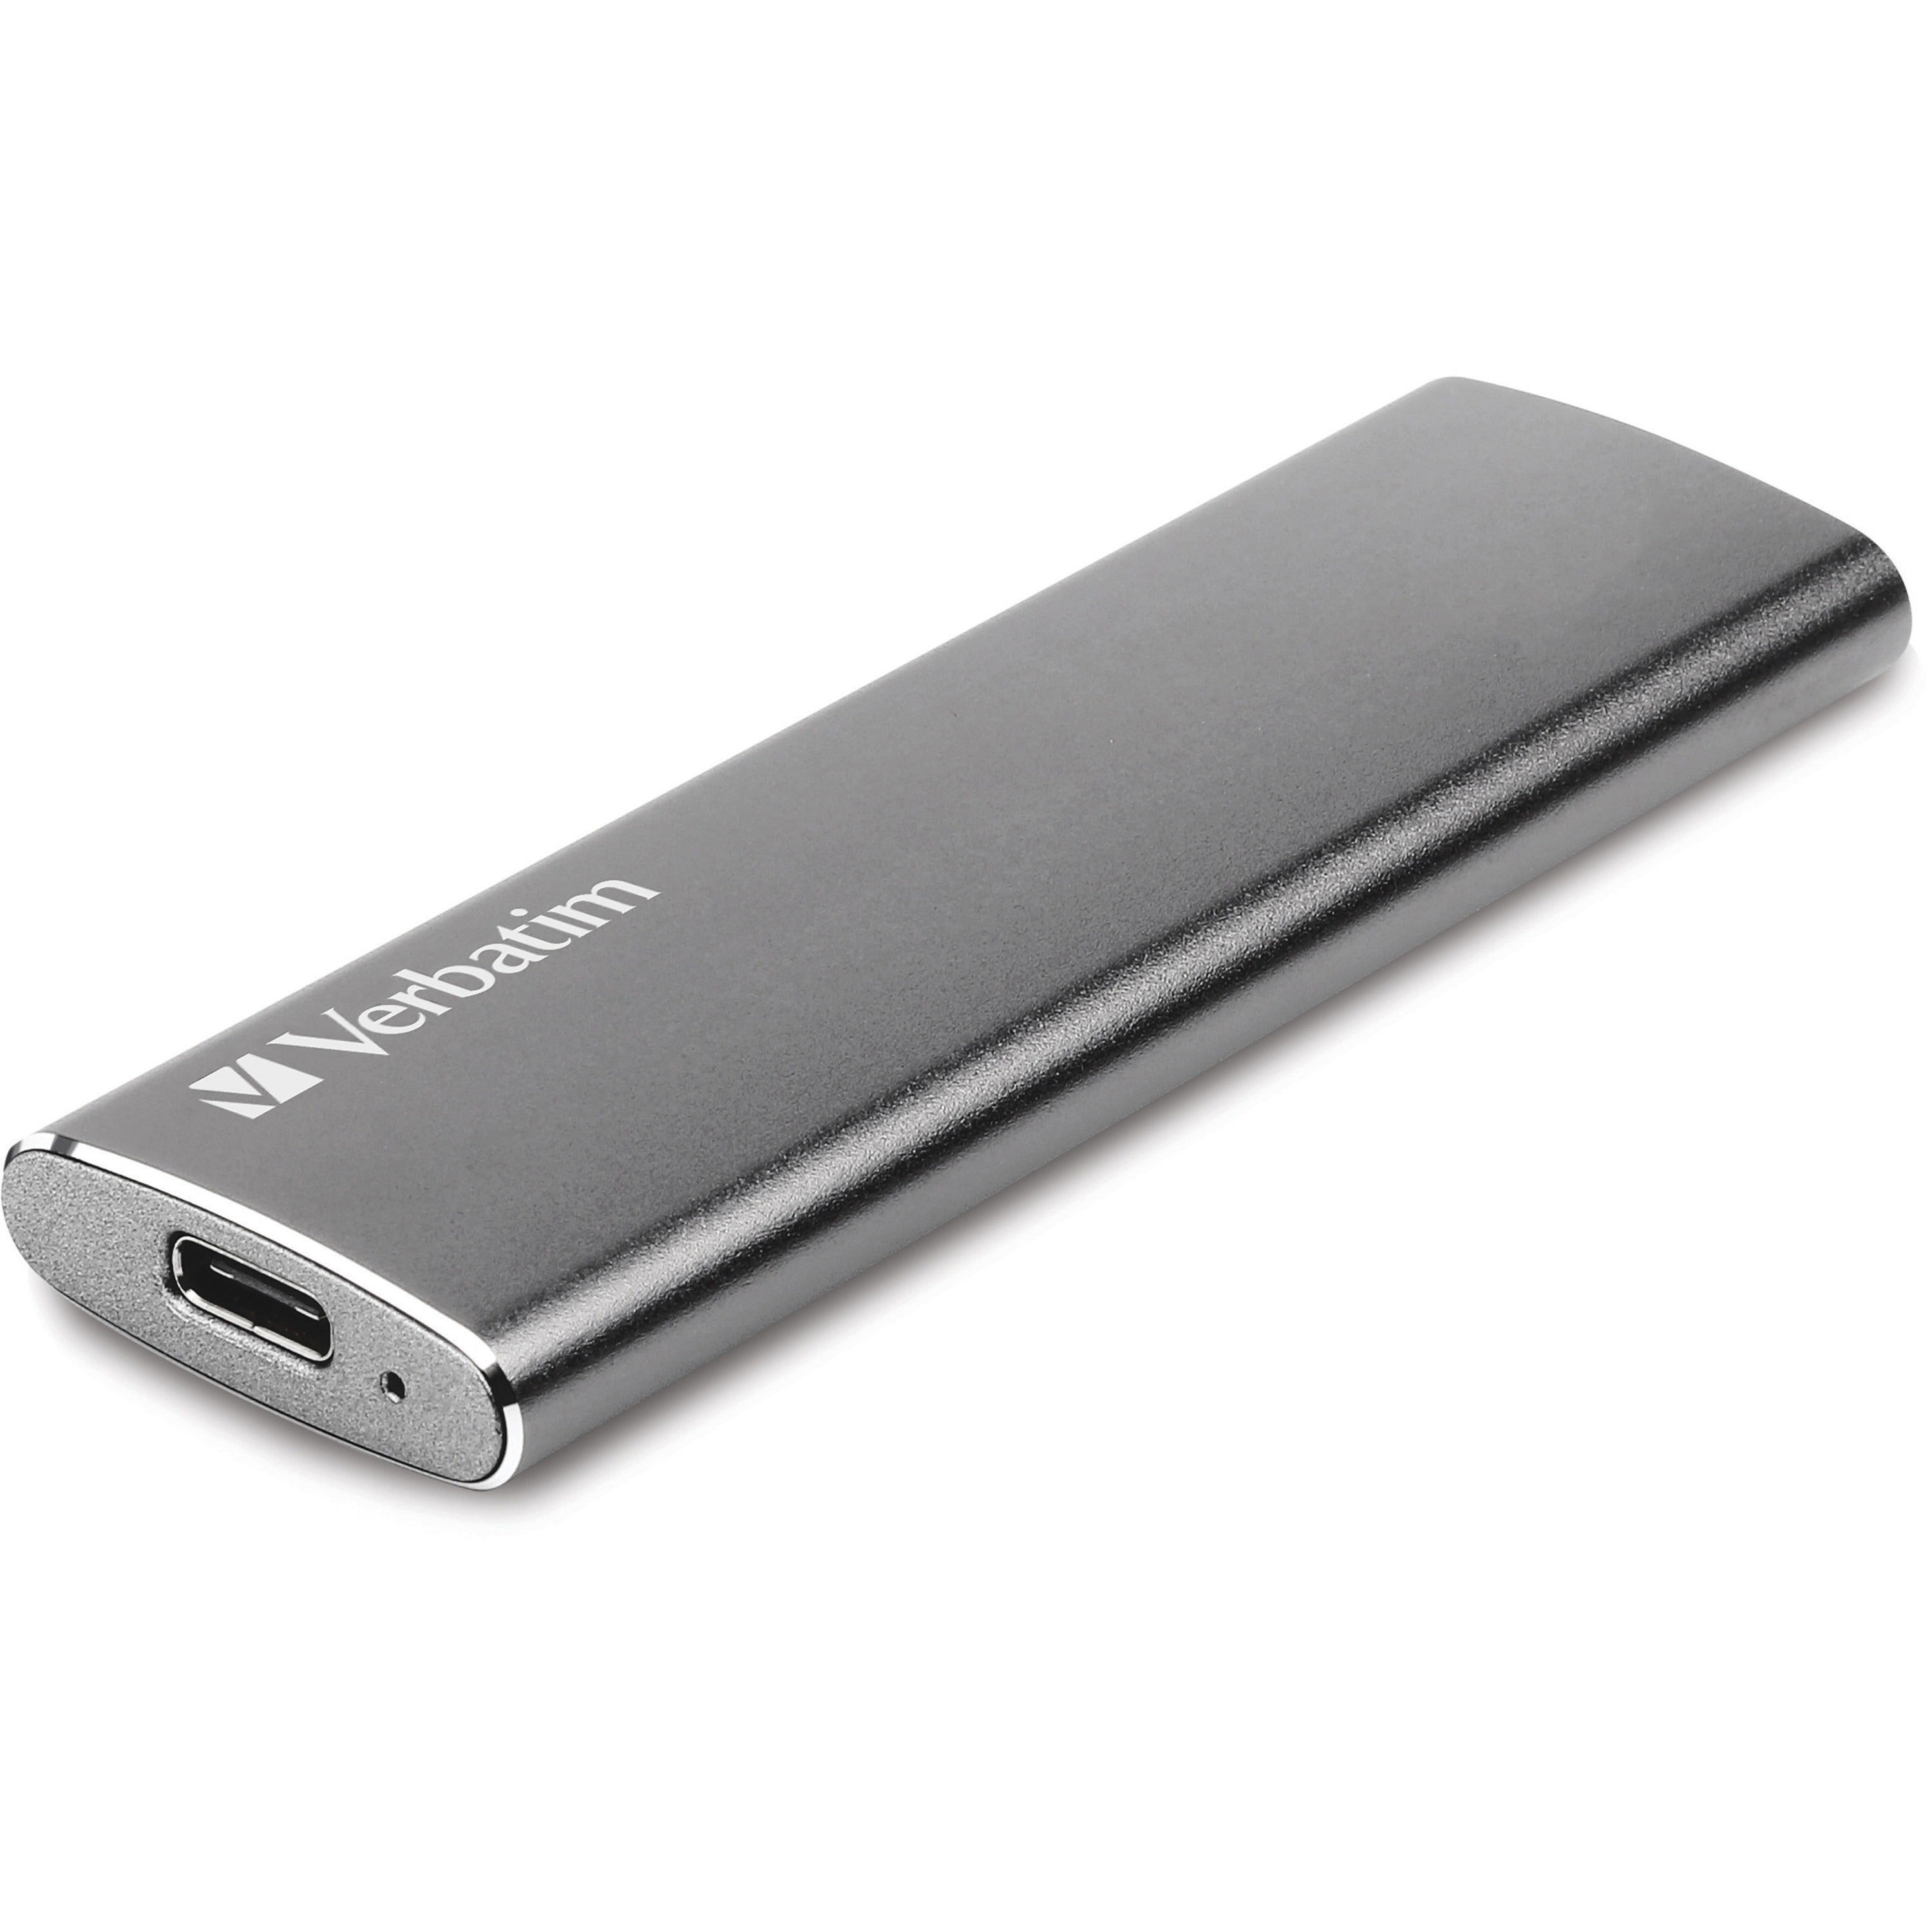 verbatim-480gb-vx500-external-ssd-usb-31-gen-2-graphite-notebook-device-supported-usb-31-type-c-500-mb-s-maximum-read-transfer-rate-2-year-warranty_ver47443 - 1